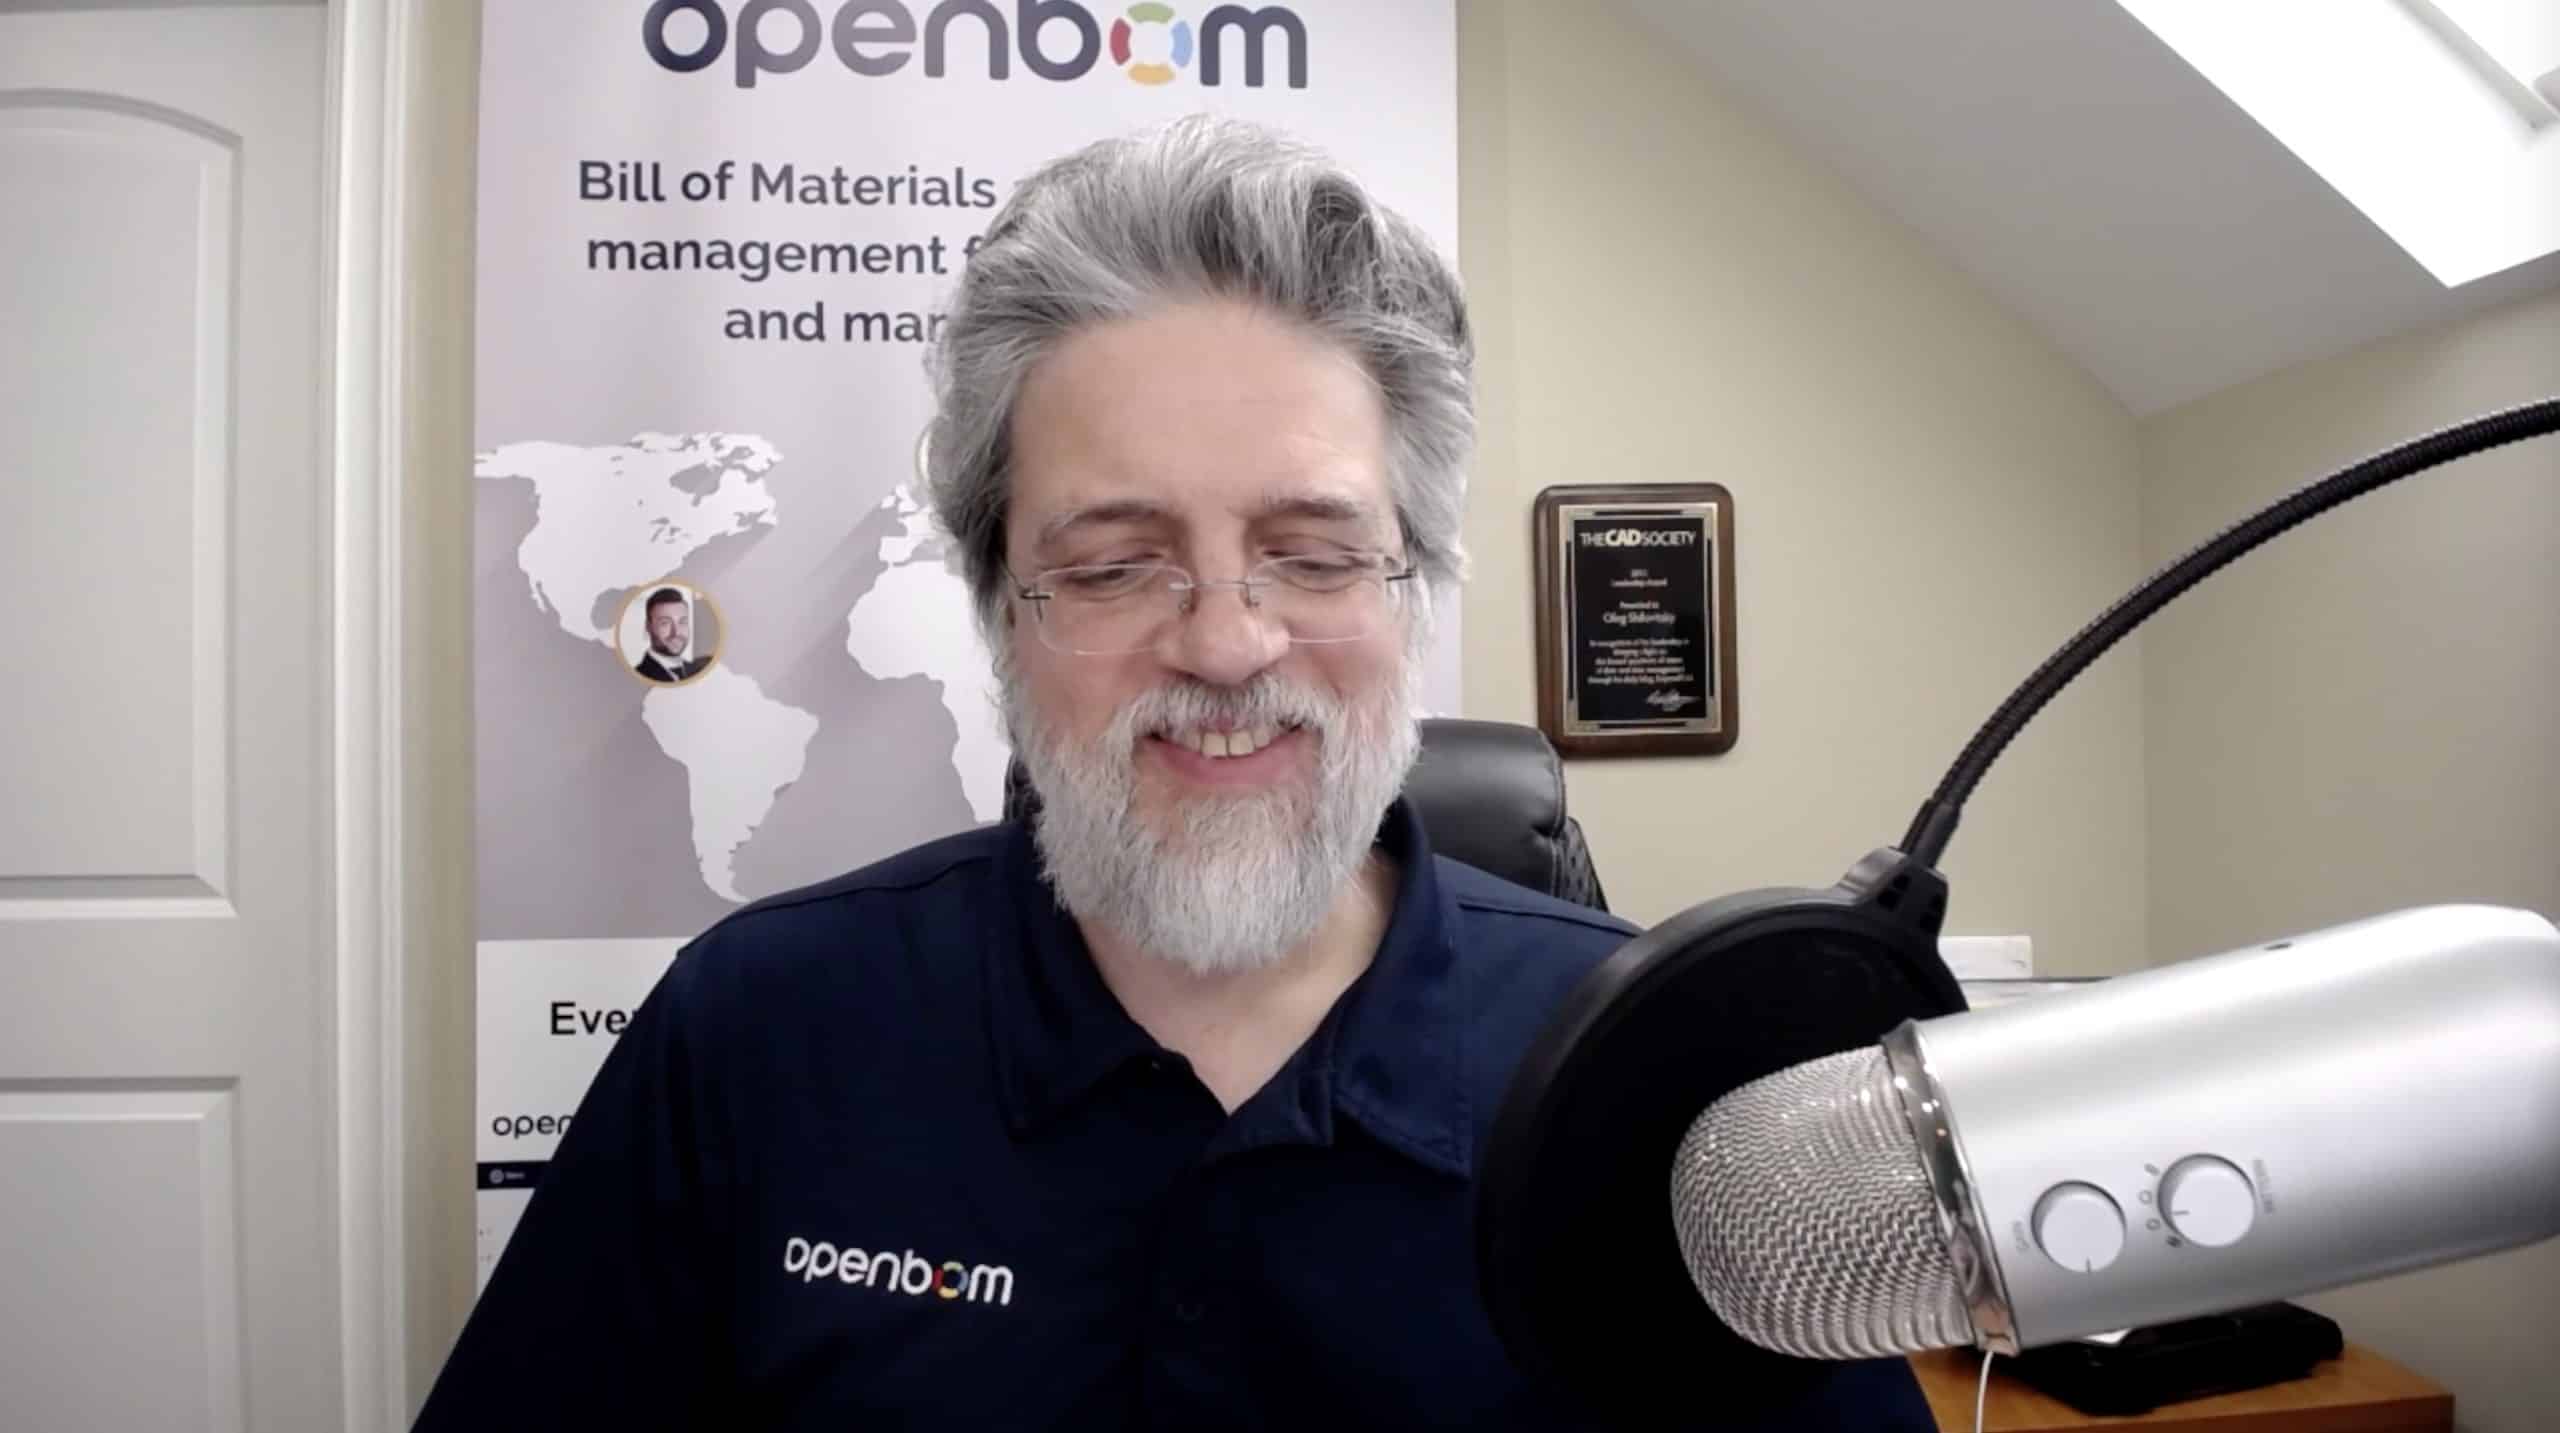 FRIDAY VIDEO STORY: What is OpenBOM?